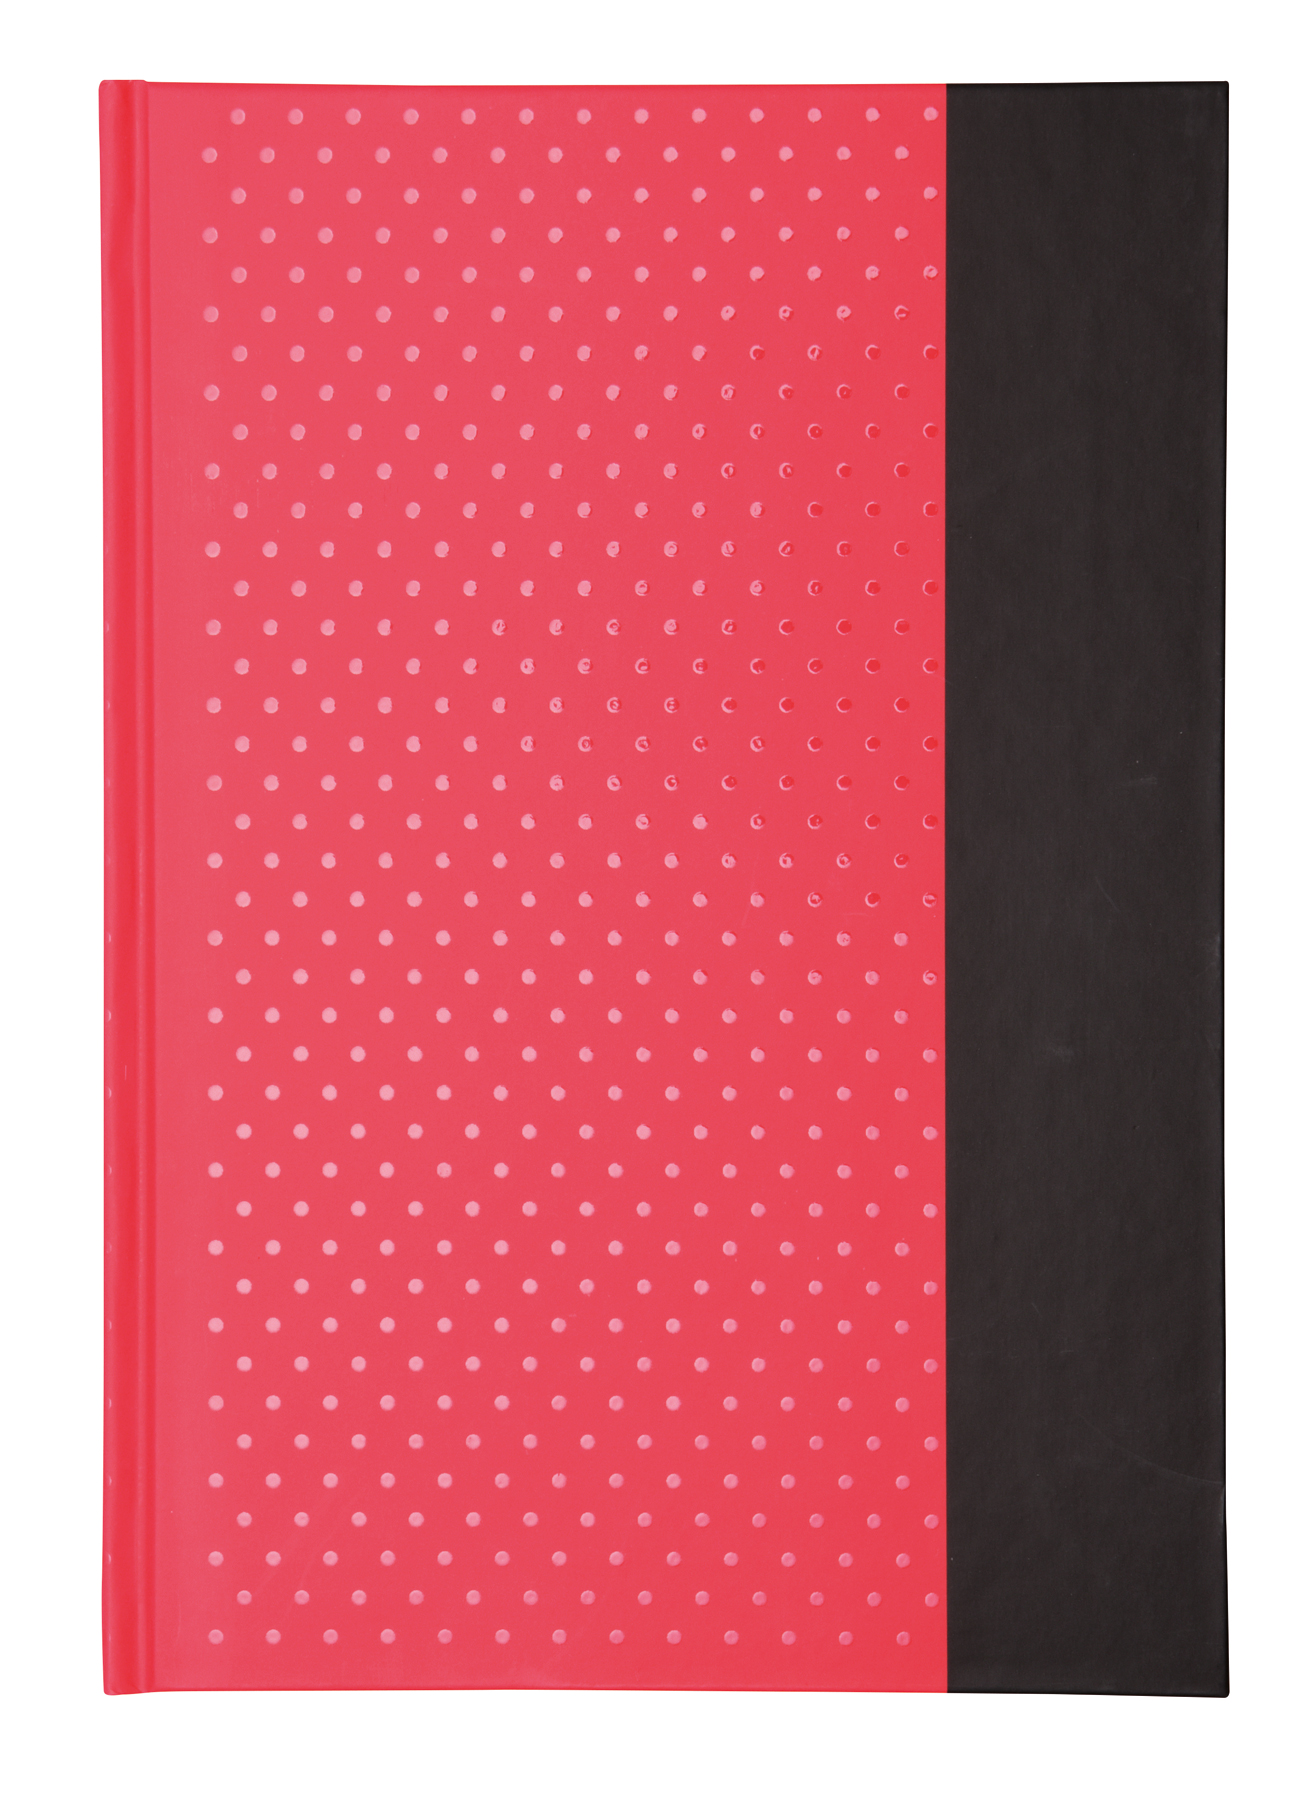 Notebook SIGNUM in DIN A5 format - red